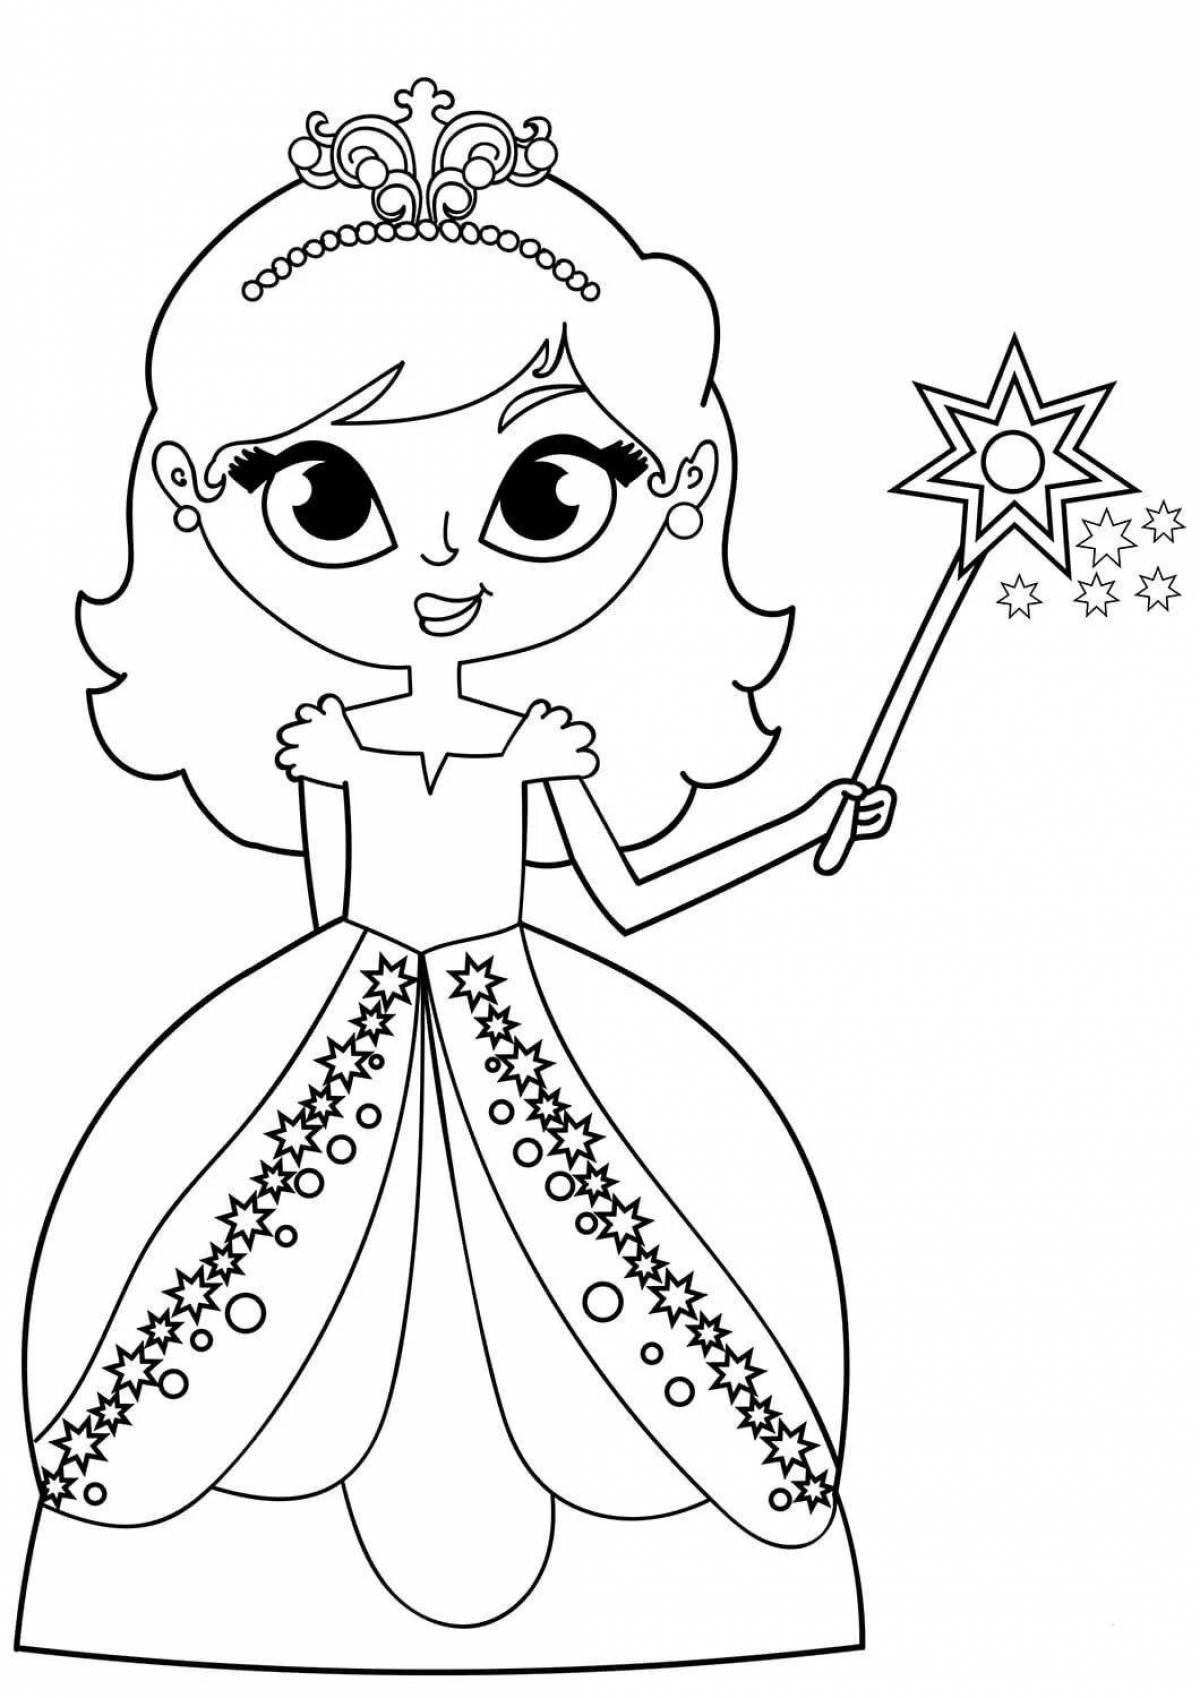 Adorable princess coloring pages for girls 4 years old